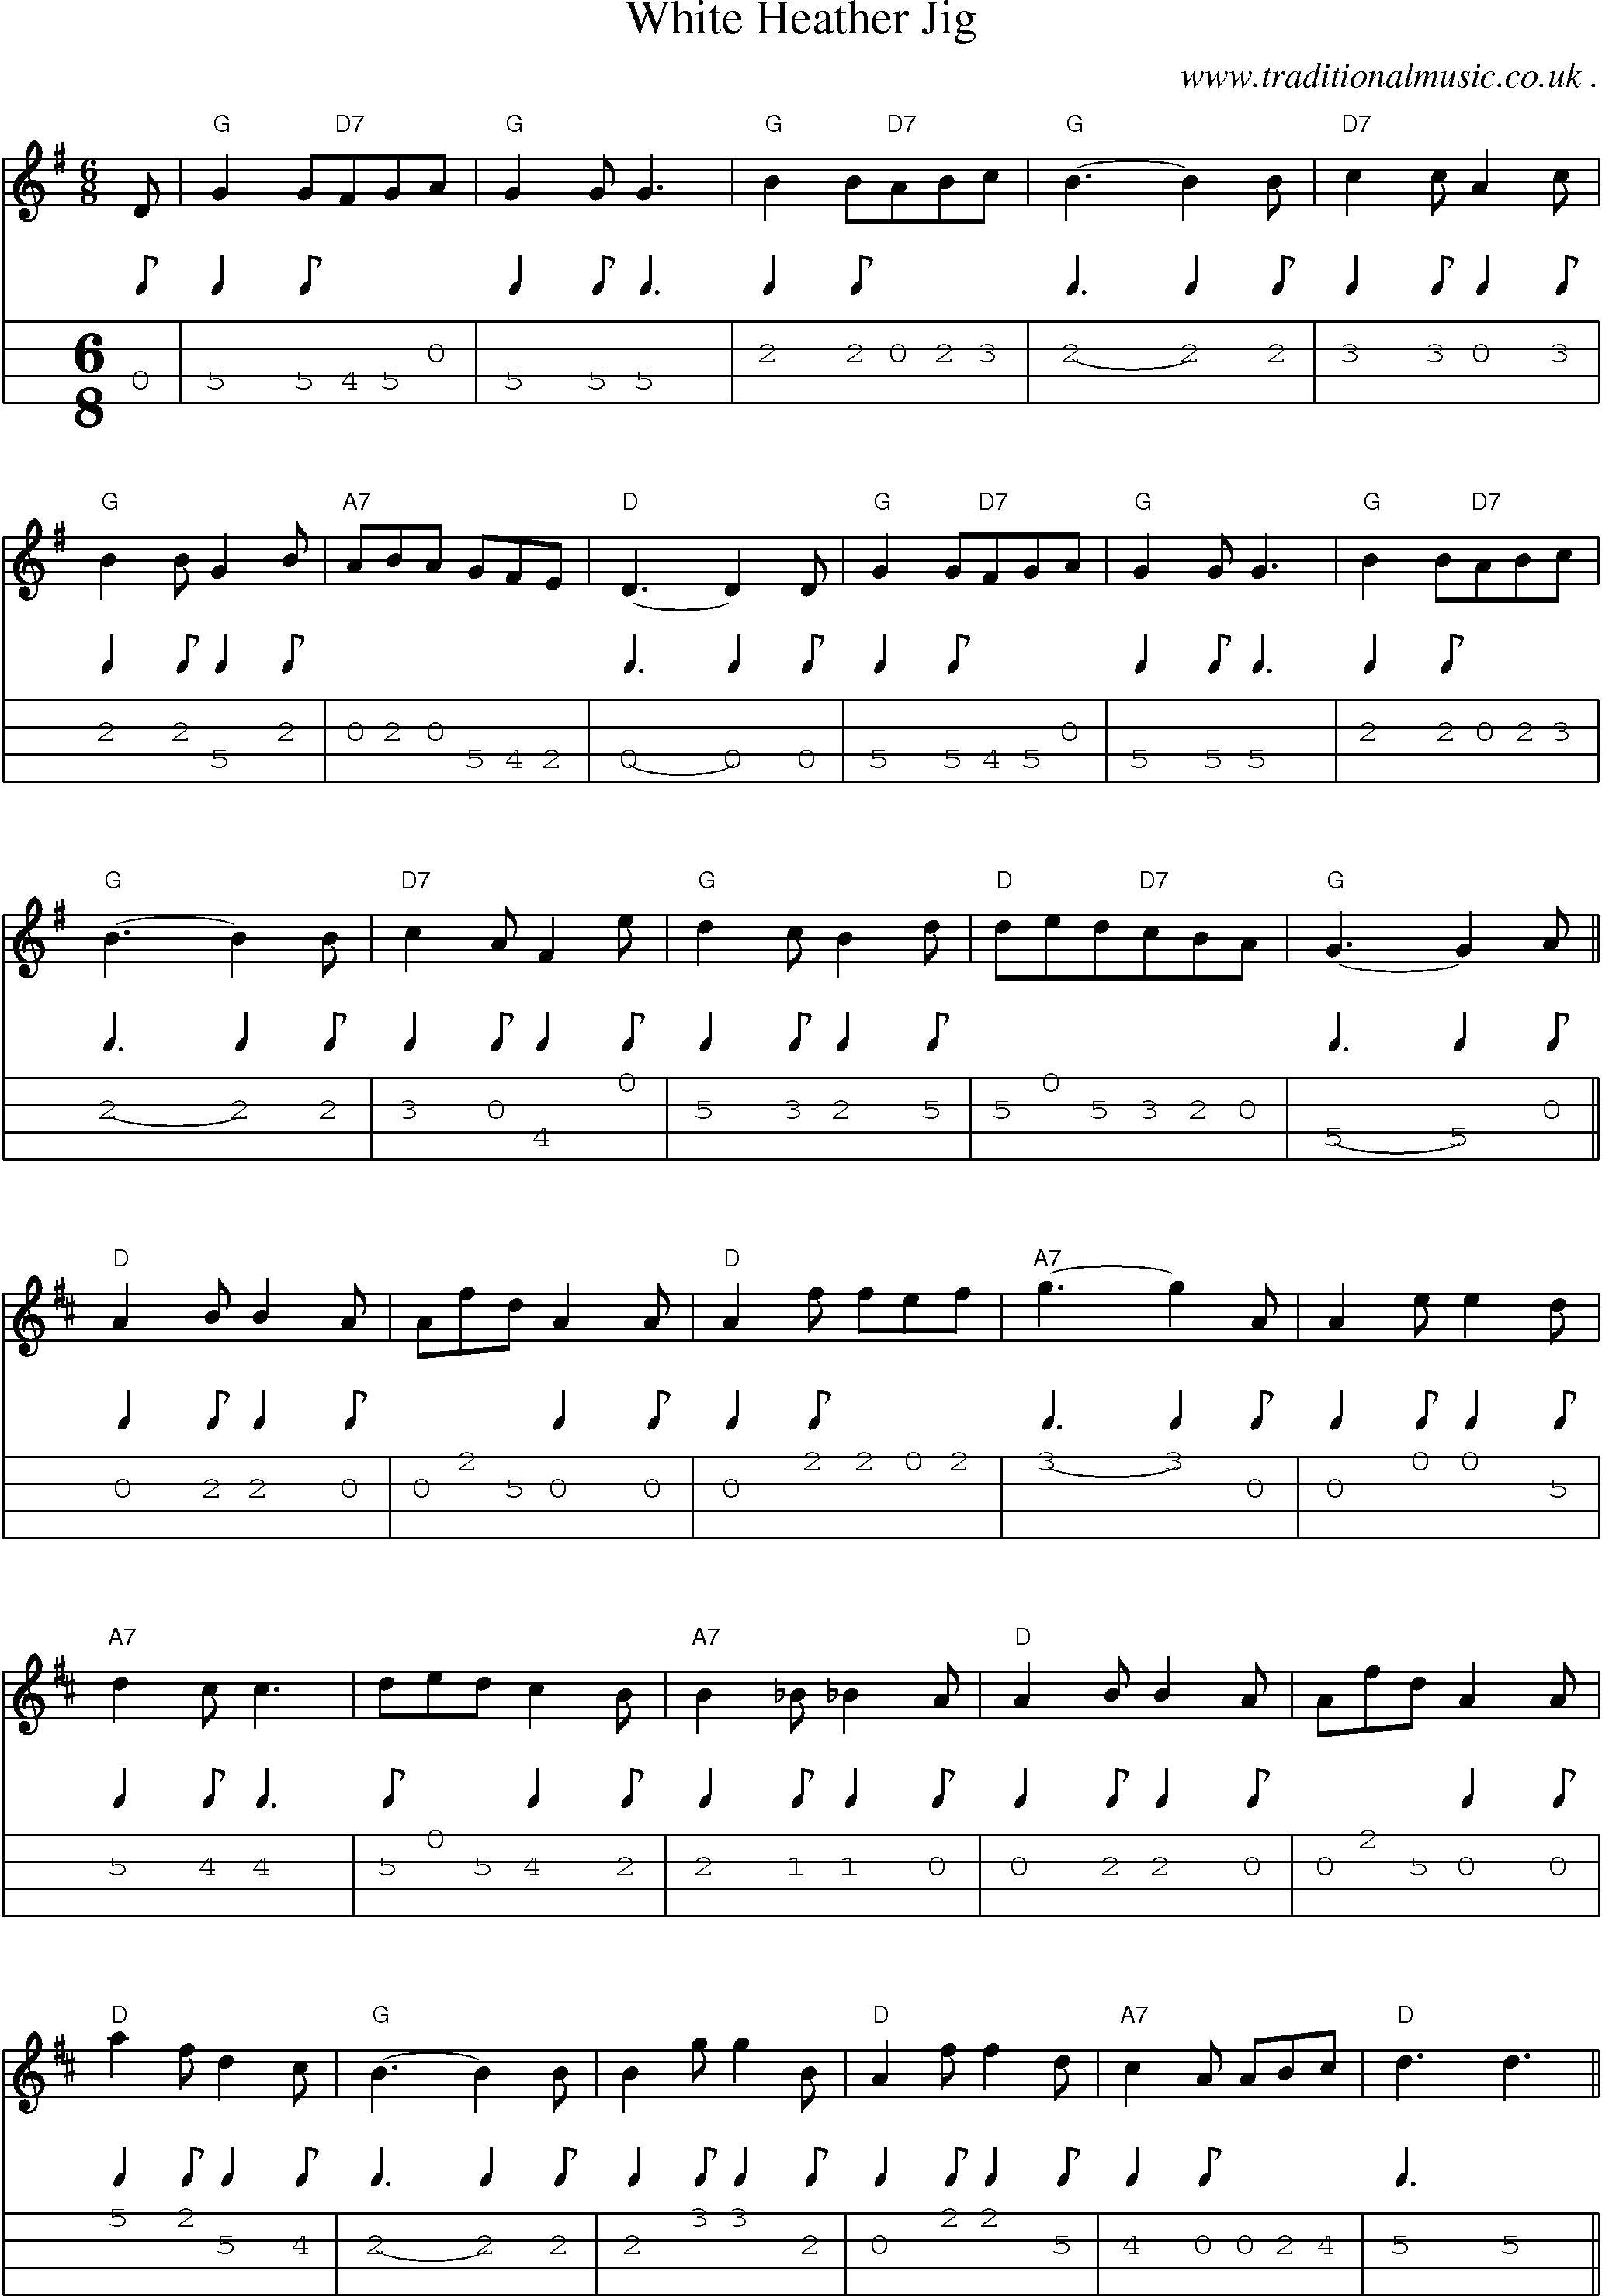 Sheet-Music and Mandolin Tabs for White Heather Jig